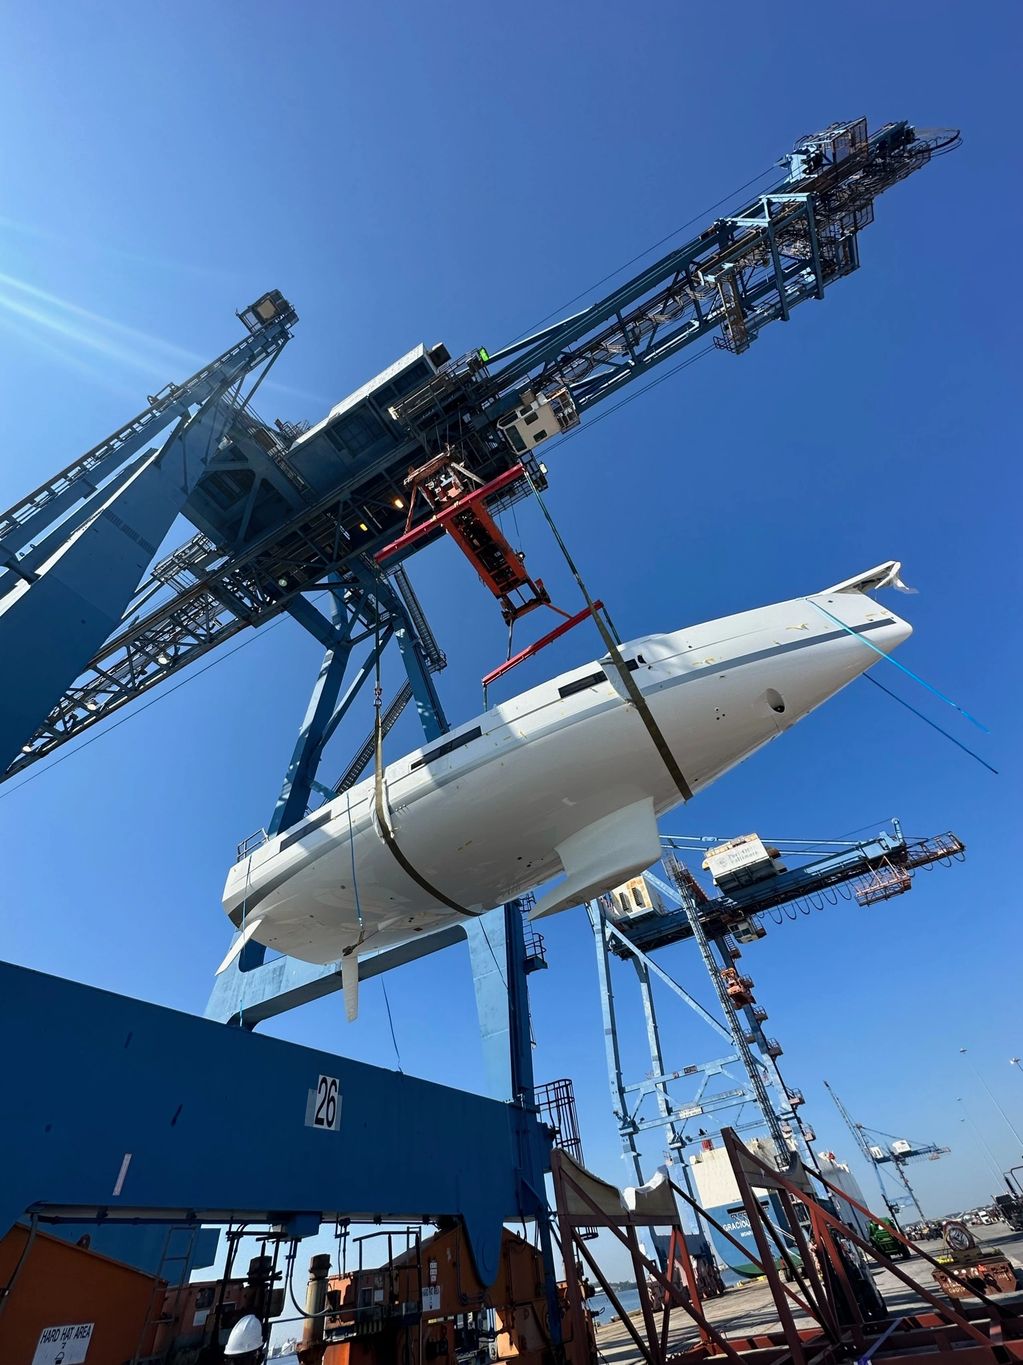 A new Jeanneau being craned off its transport ship at the Port of Baltimore.